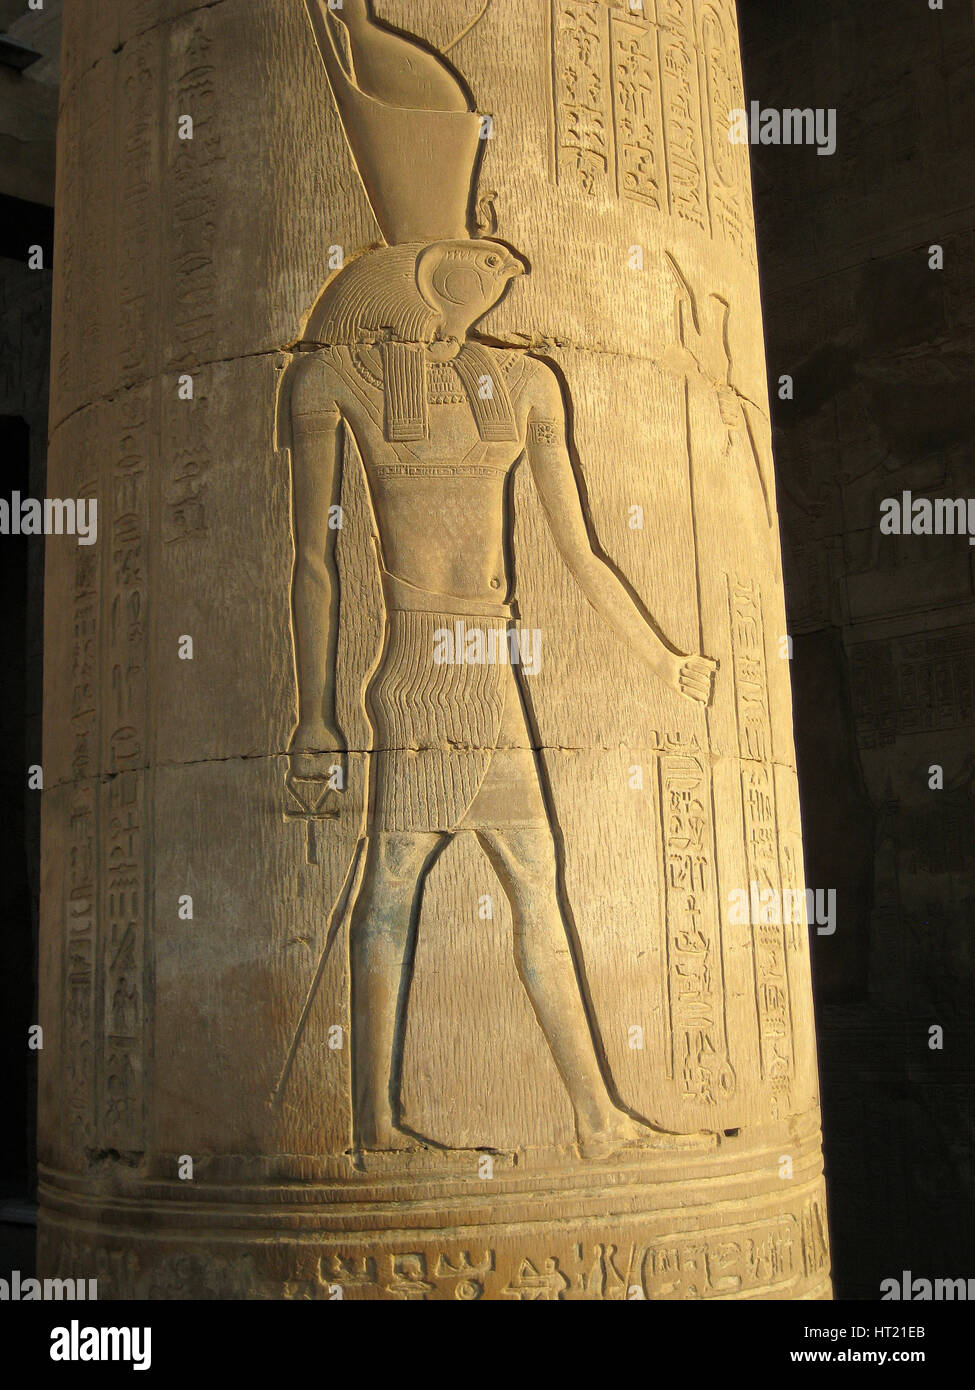 A relief depicting the god, Horus on as column of one of the temples of Kom Ombo.The southern temple Artist: Werner Forman. Stock Photo